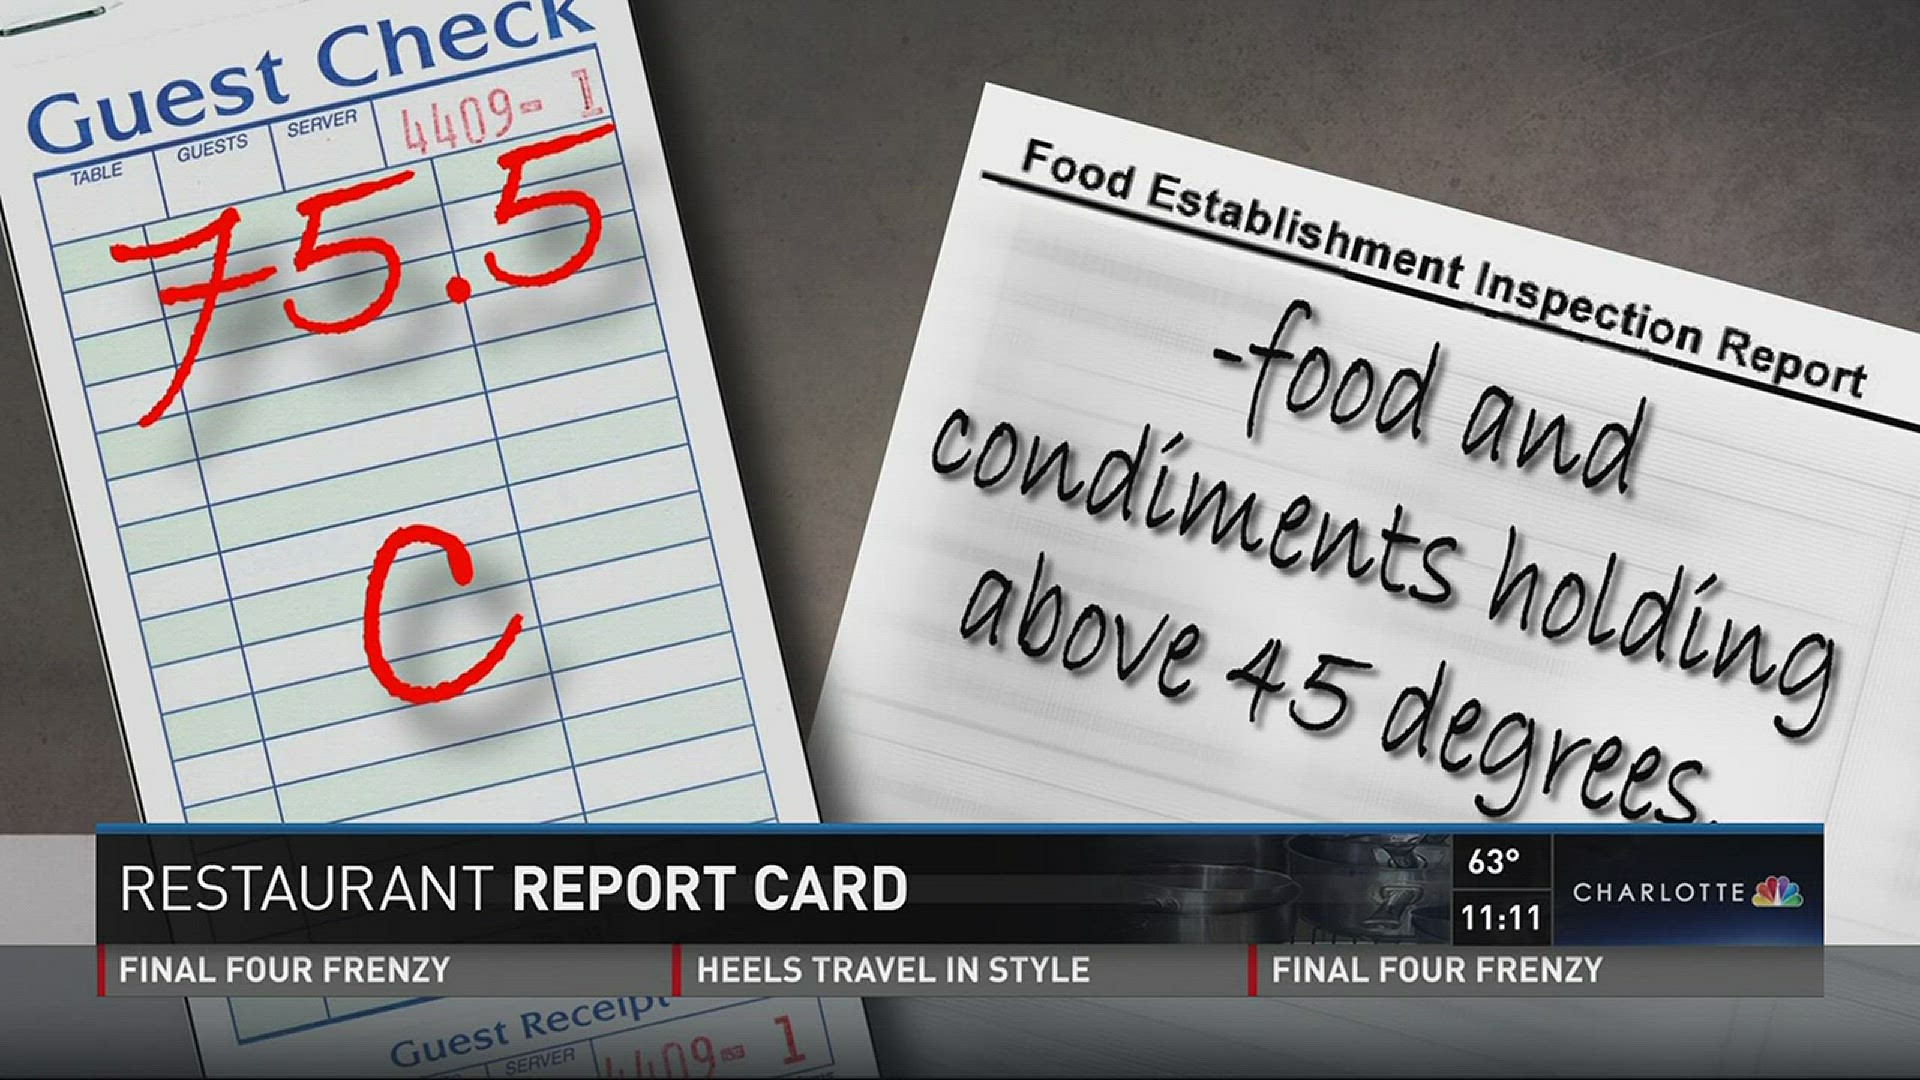 A repeat offender scored a "C" on this week's Restaurant Report Card.